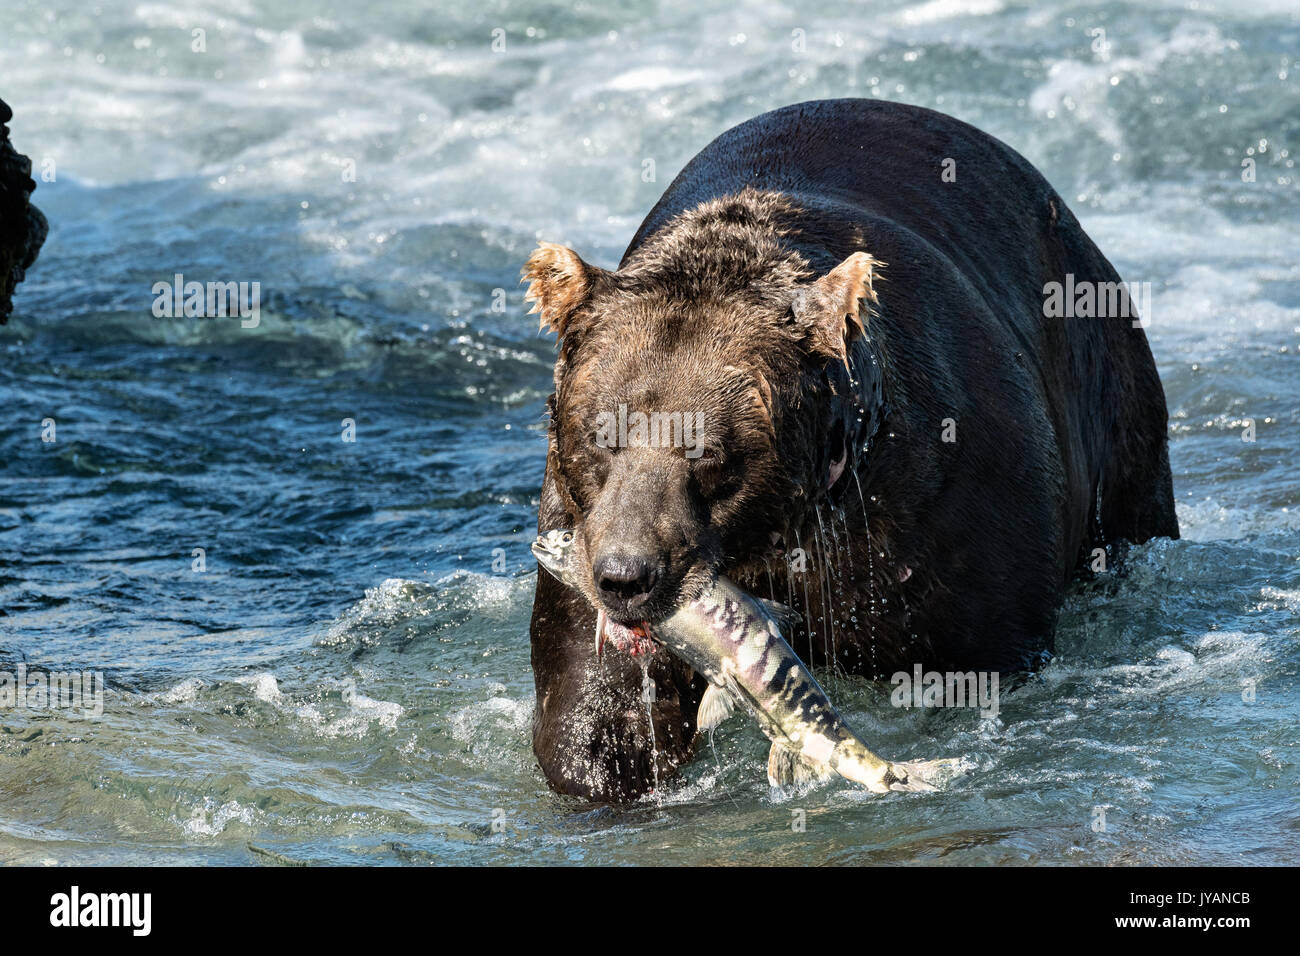 A large Grizzly bear boar catches a chum salmon in the upper McNeil River falls at the McNeil River State Game Sanctuary on the Kenai Peninsula, Alaska. The remote site is accessed only with a special permit and is the world’s largest seasonal population of brown bears. Stock Photo